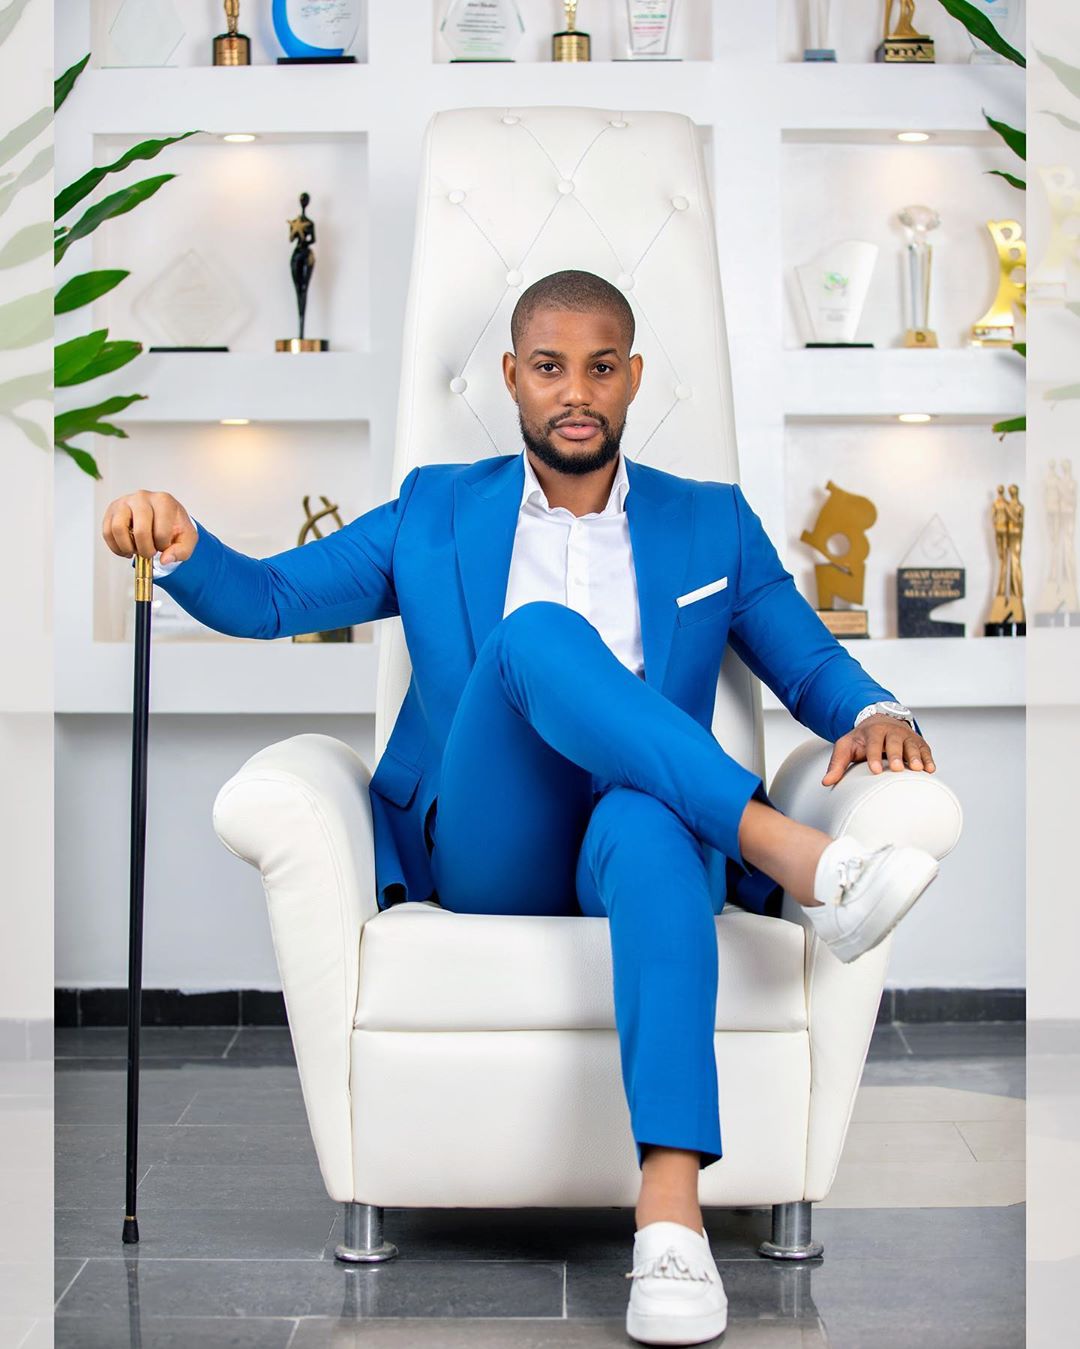 I Have Unsubscribed To Anything Marriage – Alexx Ekubo Replies Woman